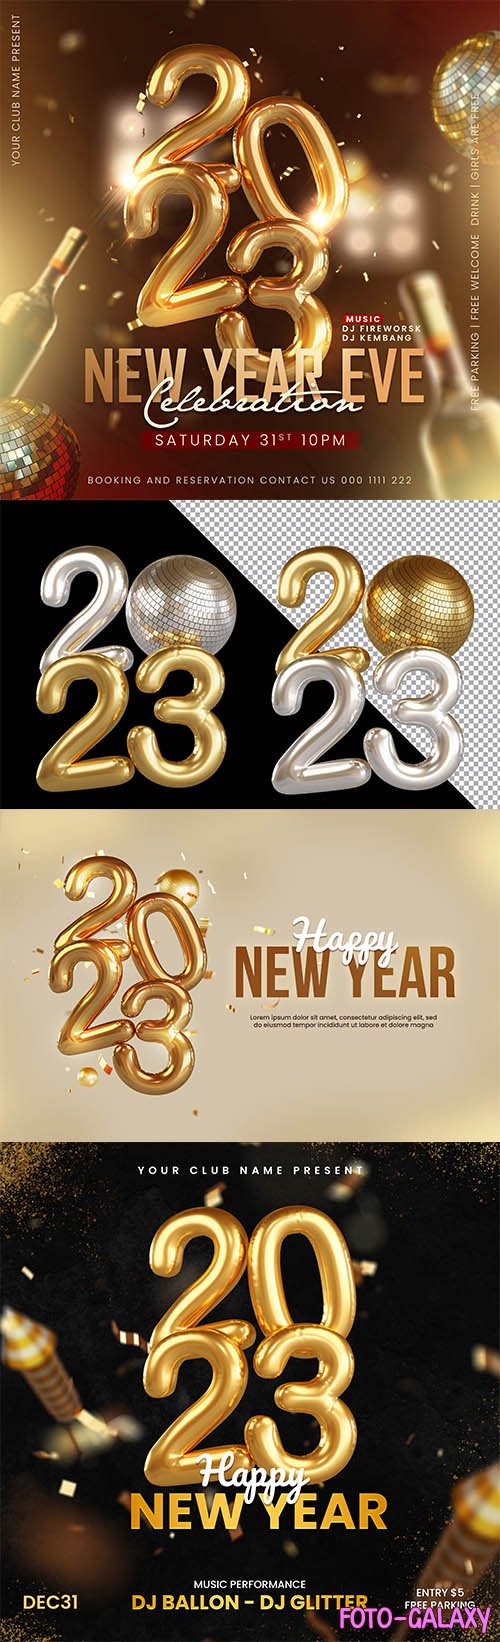 New year invitation premium psd template, 2023 isolated 3d render for design element